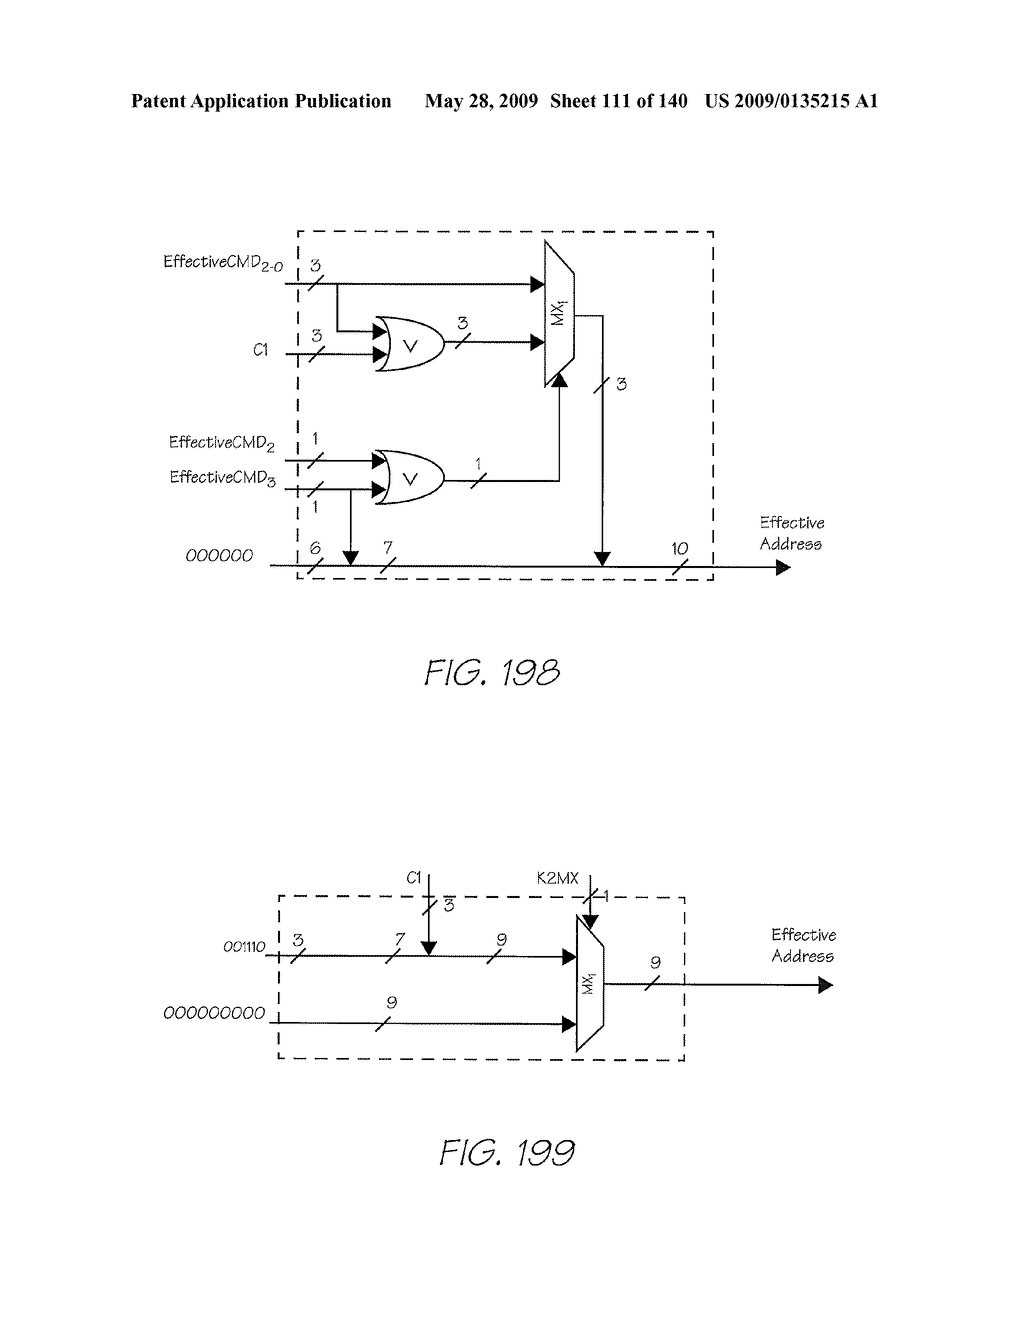 CAMERA DEVICE INCORPORATING A COLOR PRINTER WITH INK VALIDATION APPARATUS - diagram, schematic, and image 112